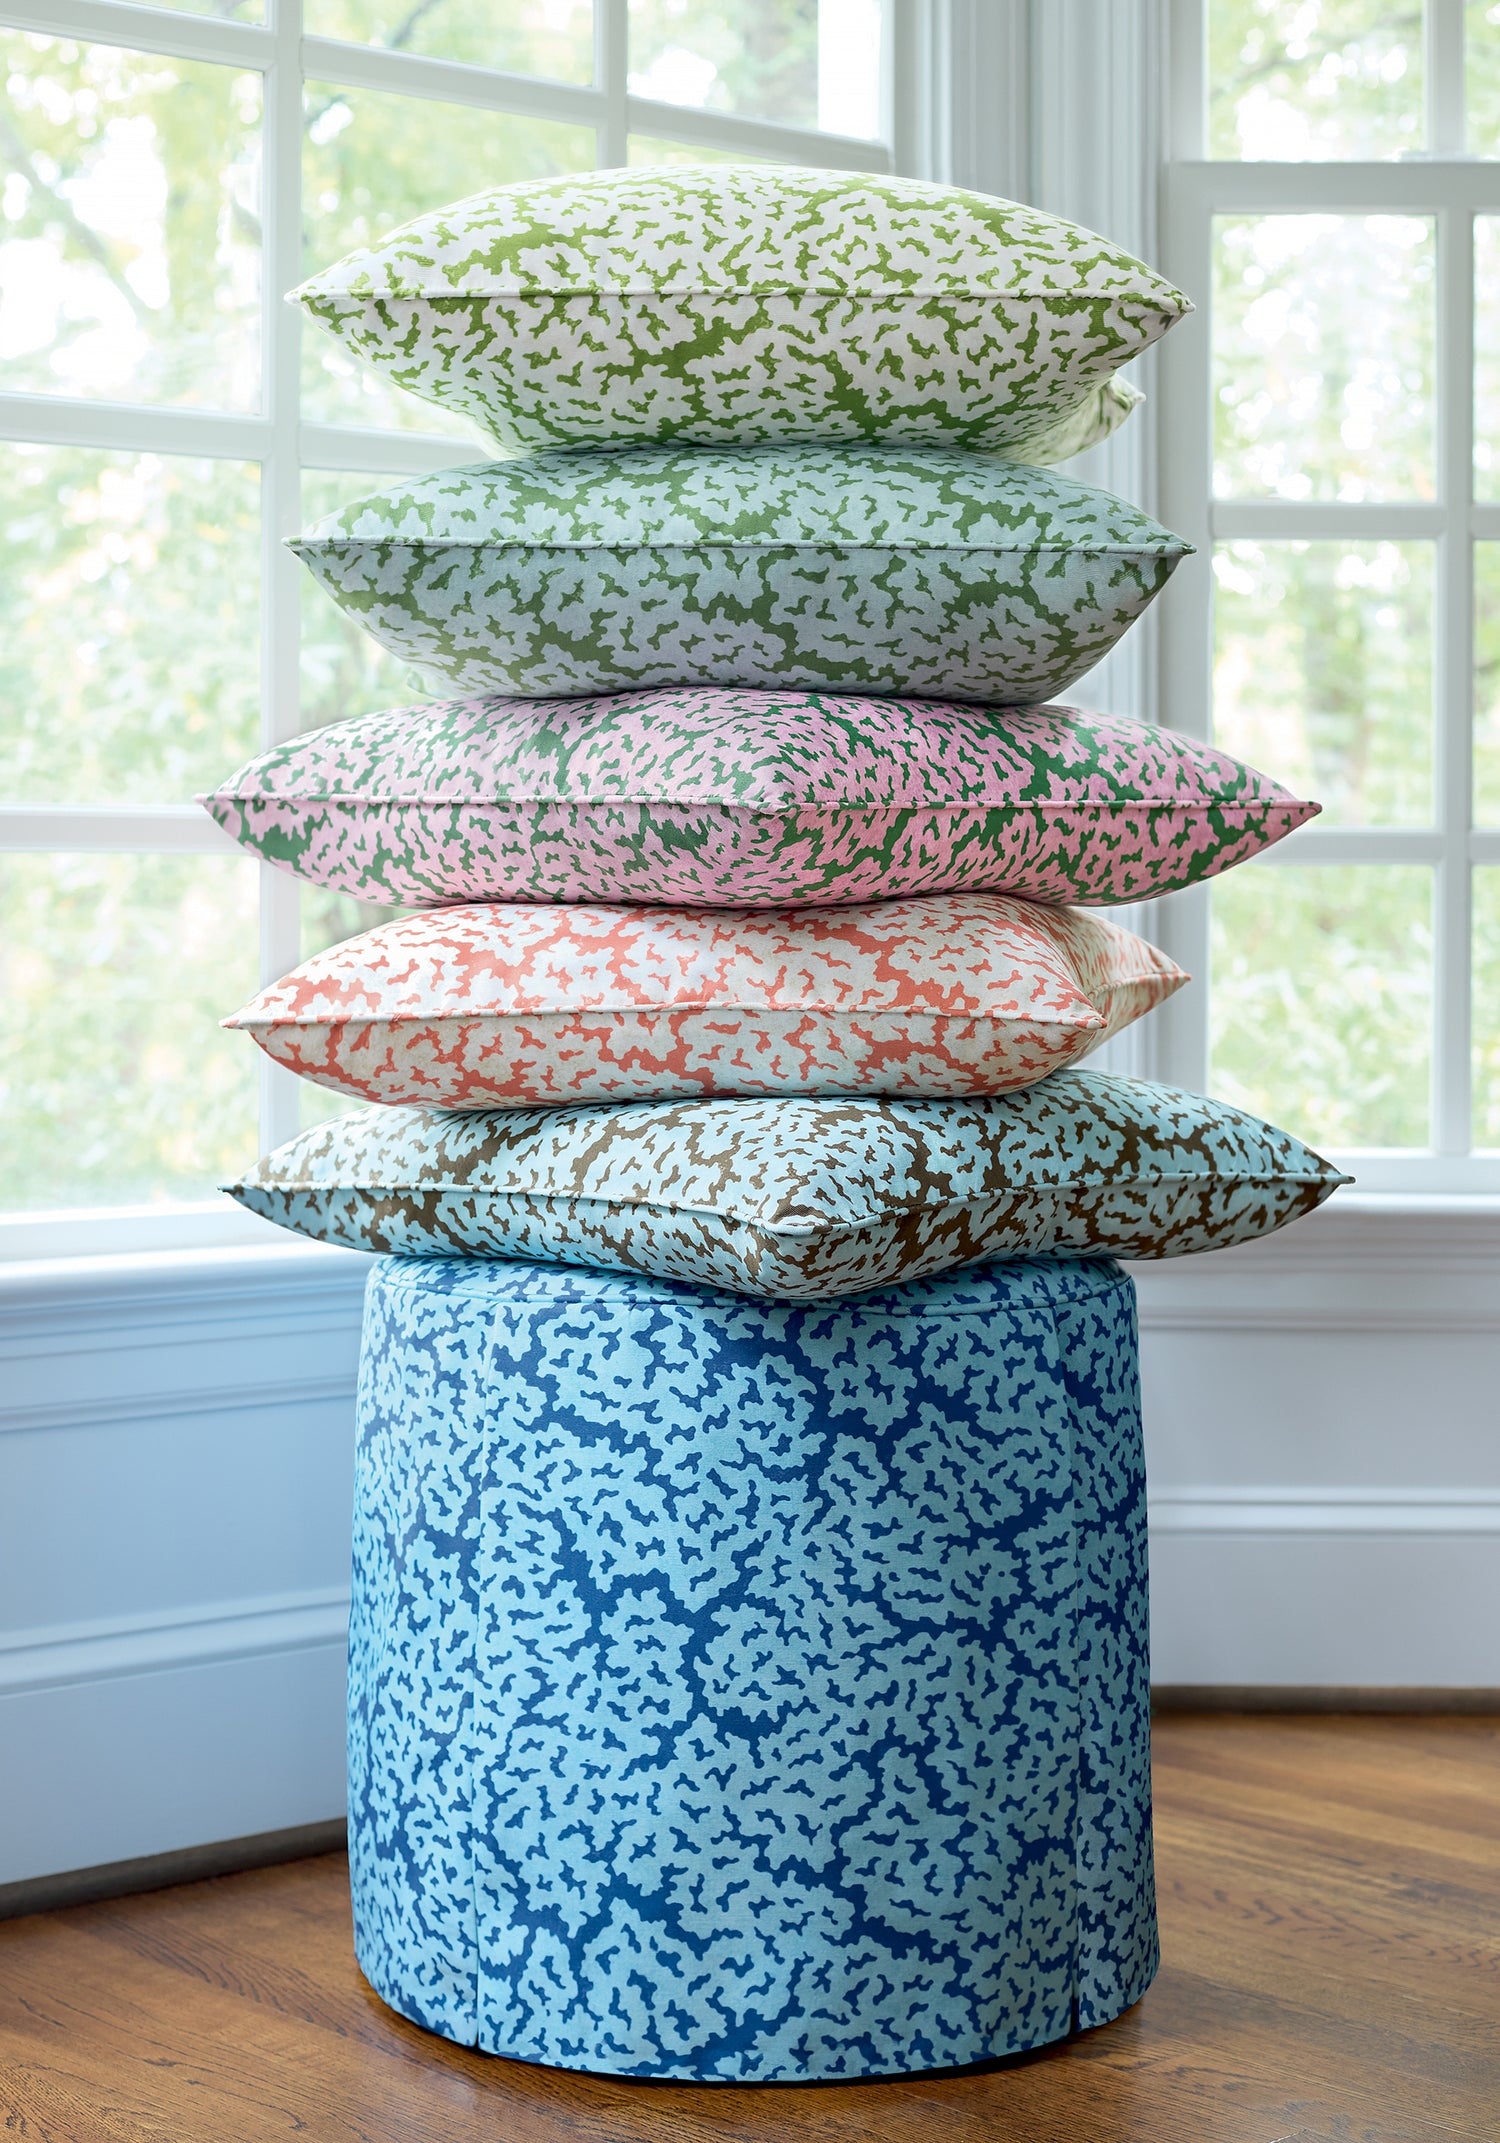 Pillow made with Maldives fabric in blue and green color - pattern number F942044 - by Thibaut in the Sojourn collection